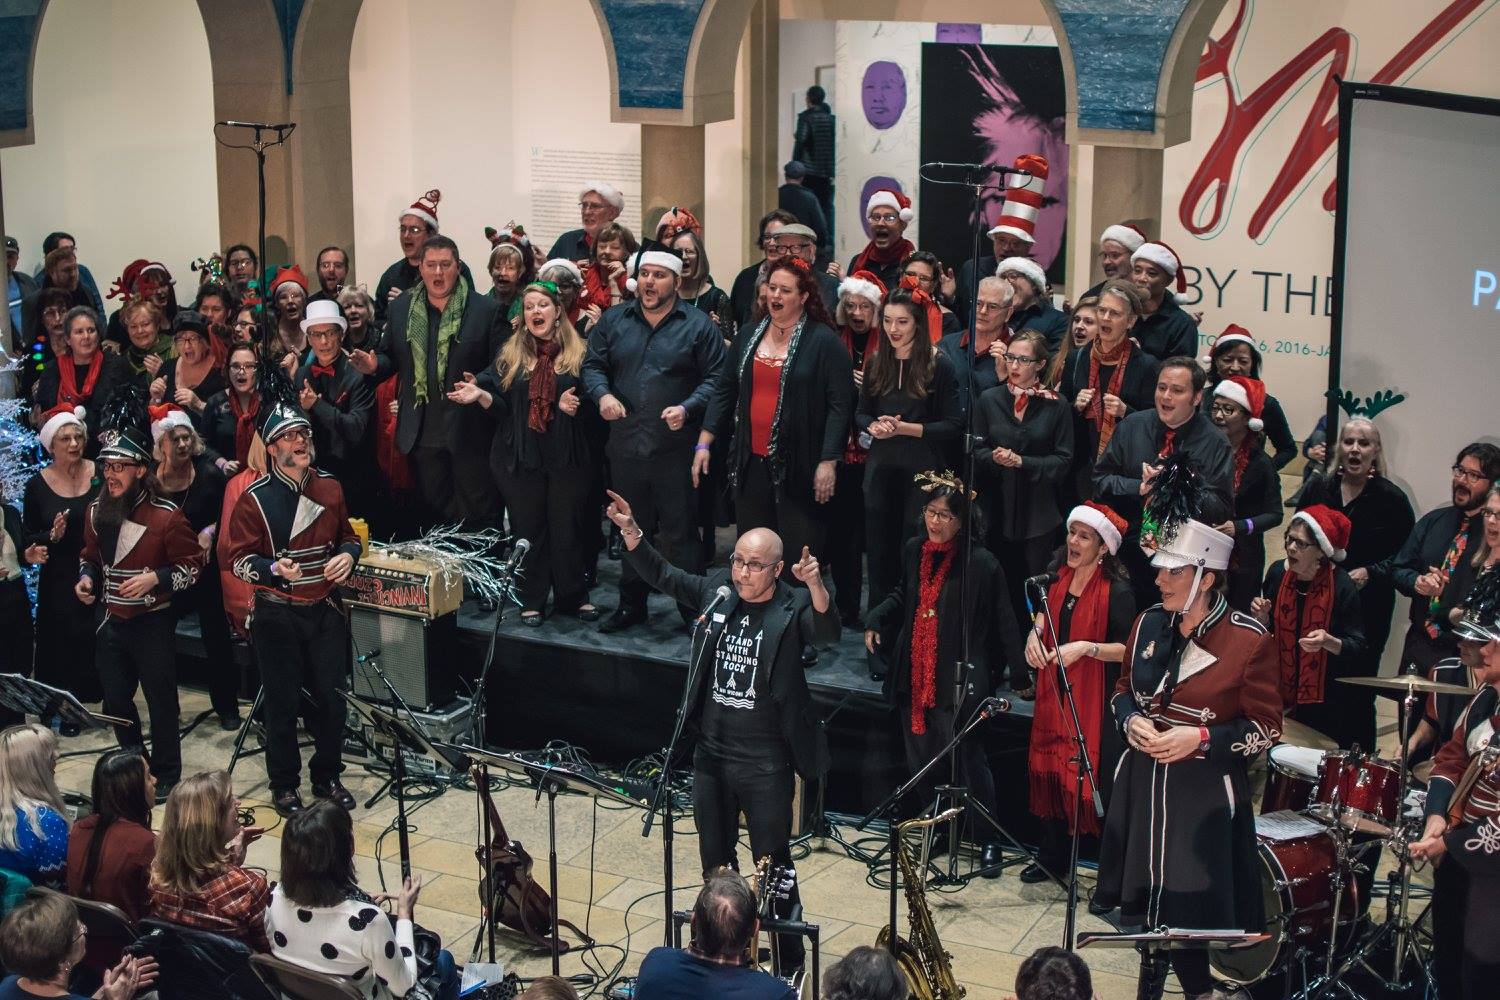 Panoramic Voices return to join forces with symphonic rockers the Invincible Czars for the sixth-annual holiday rock show at the Blanton